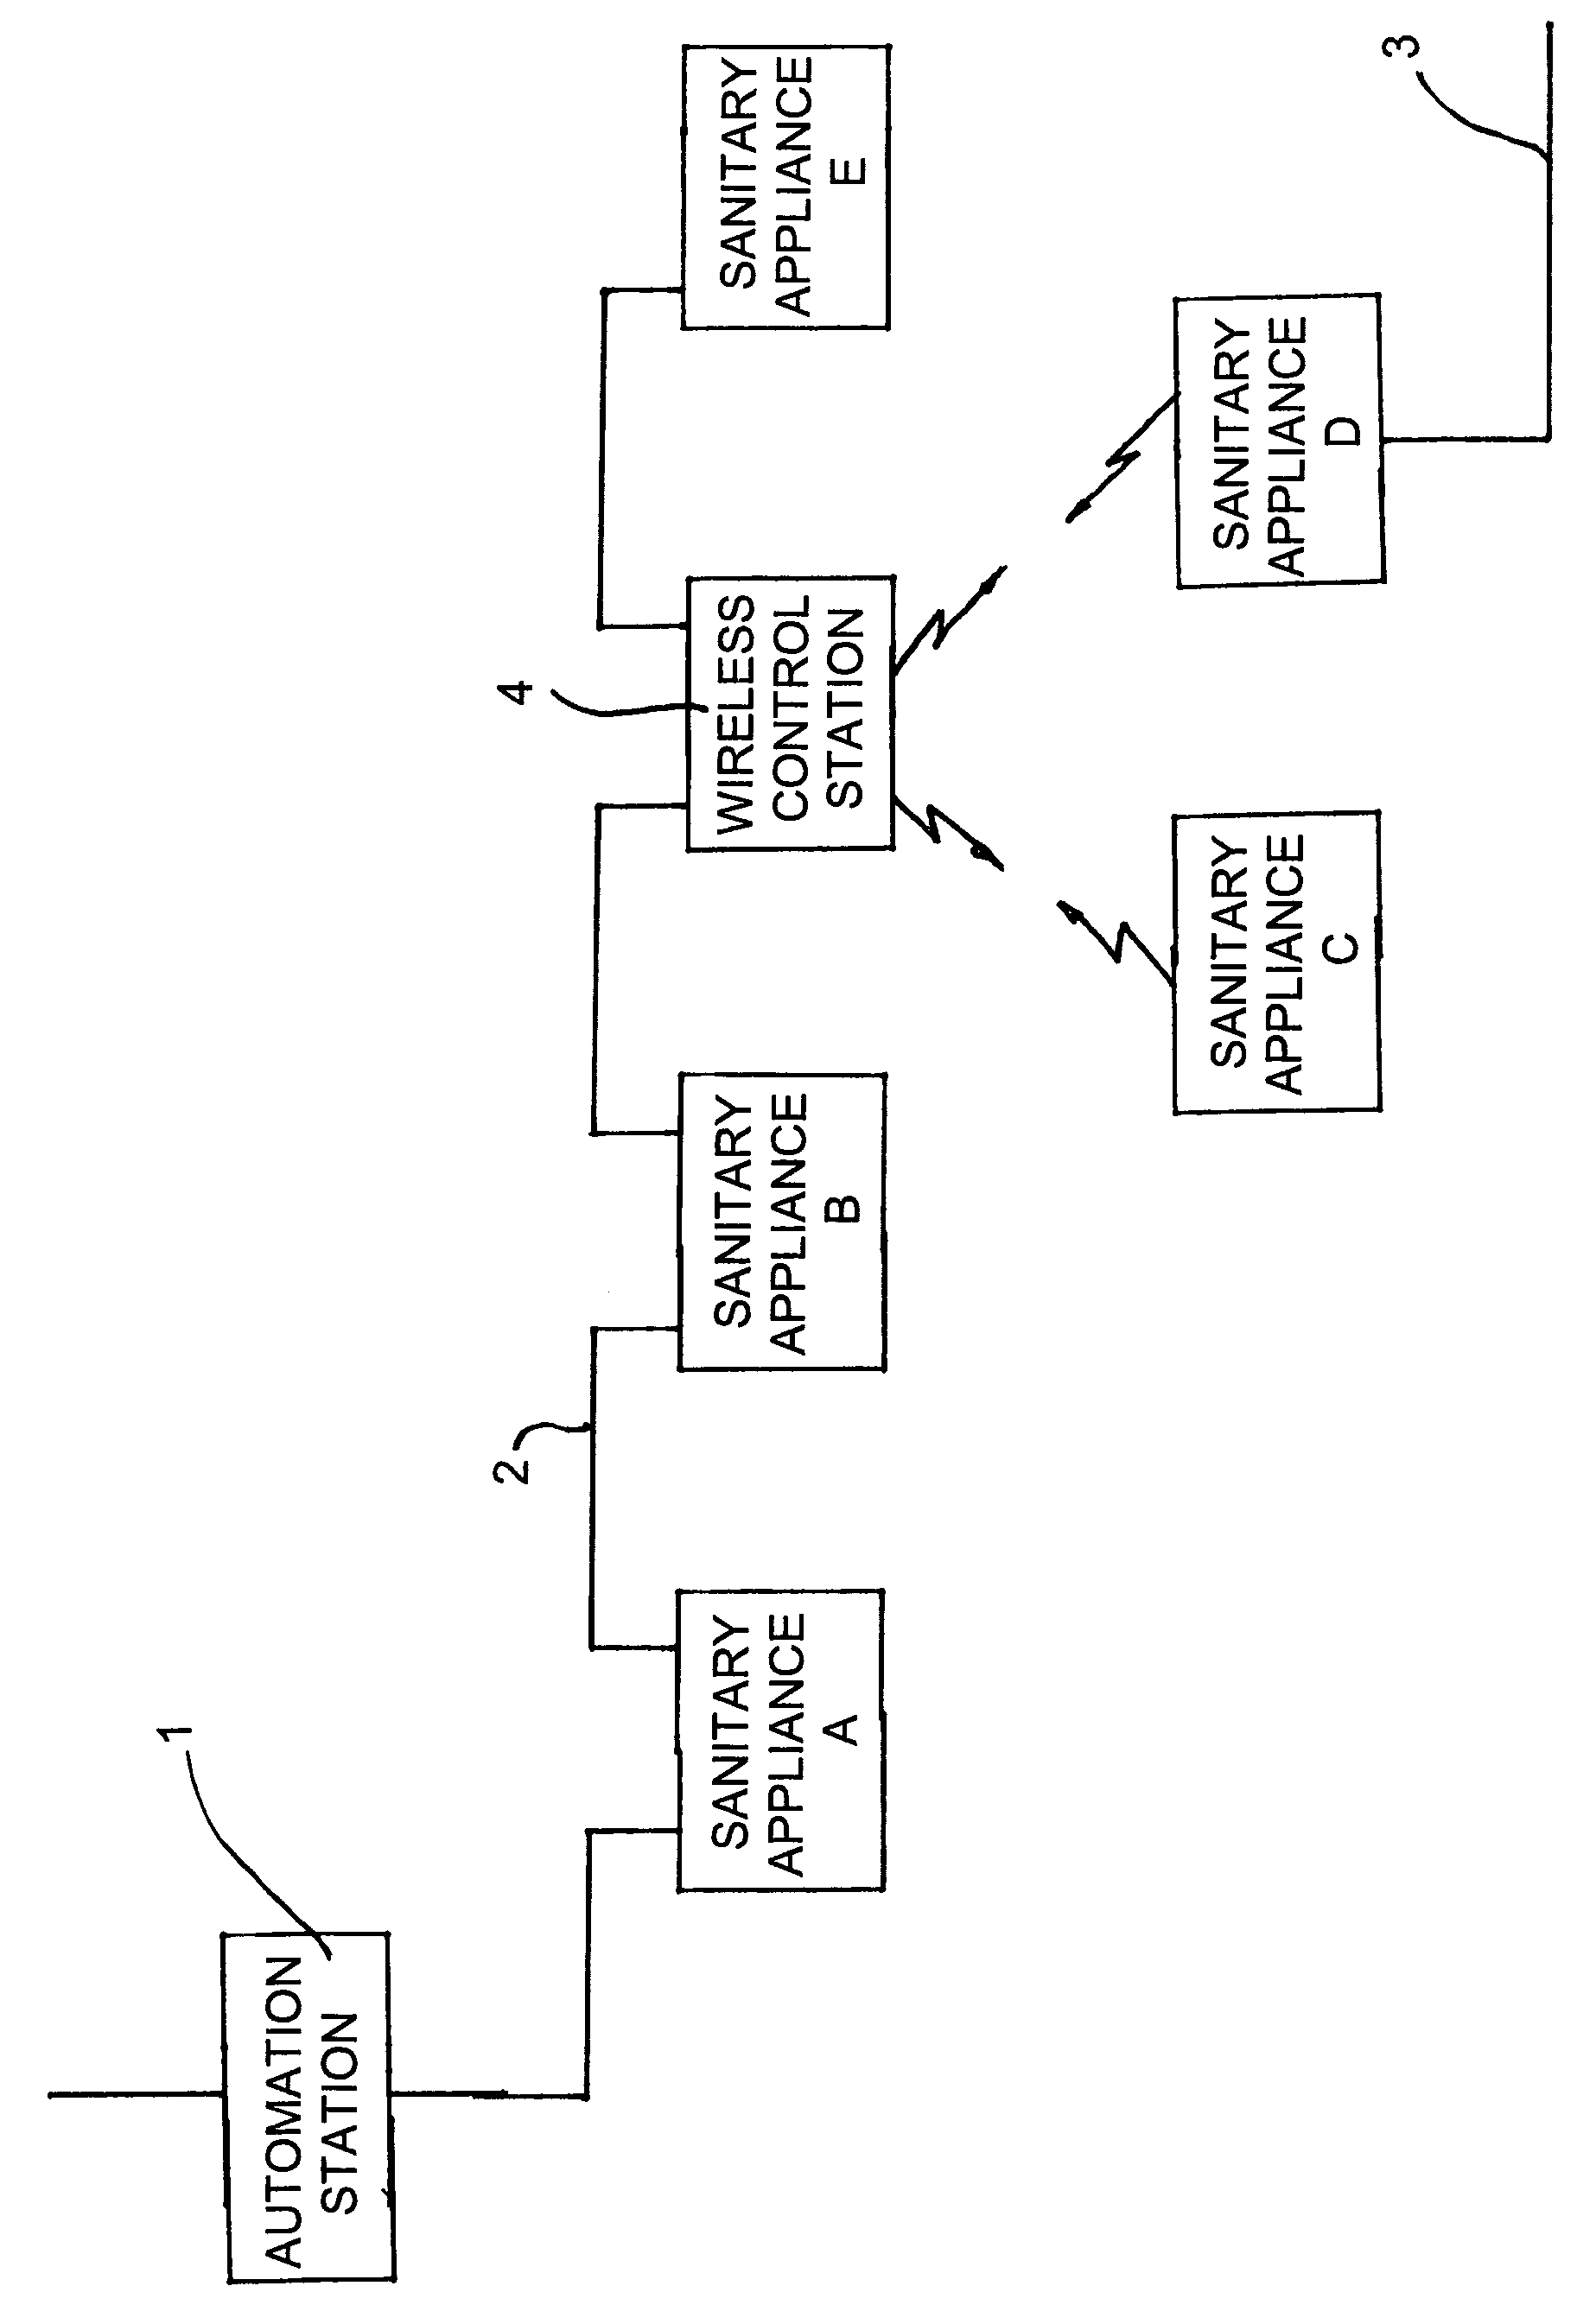 System for the control and monitoring of sanitary appliances